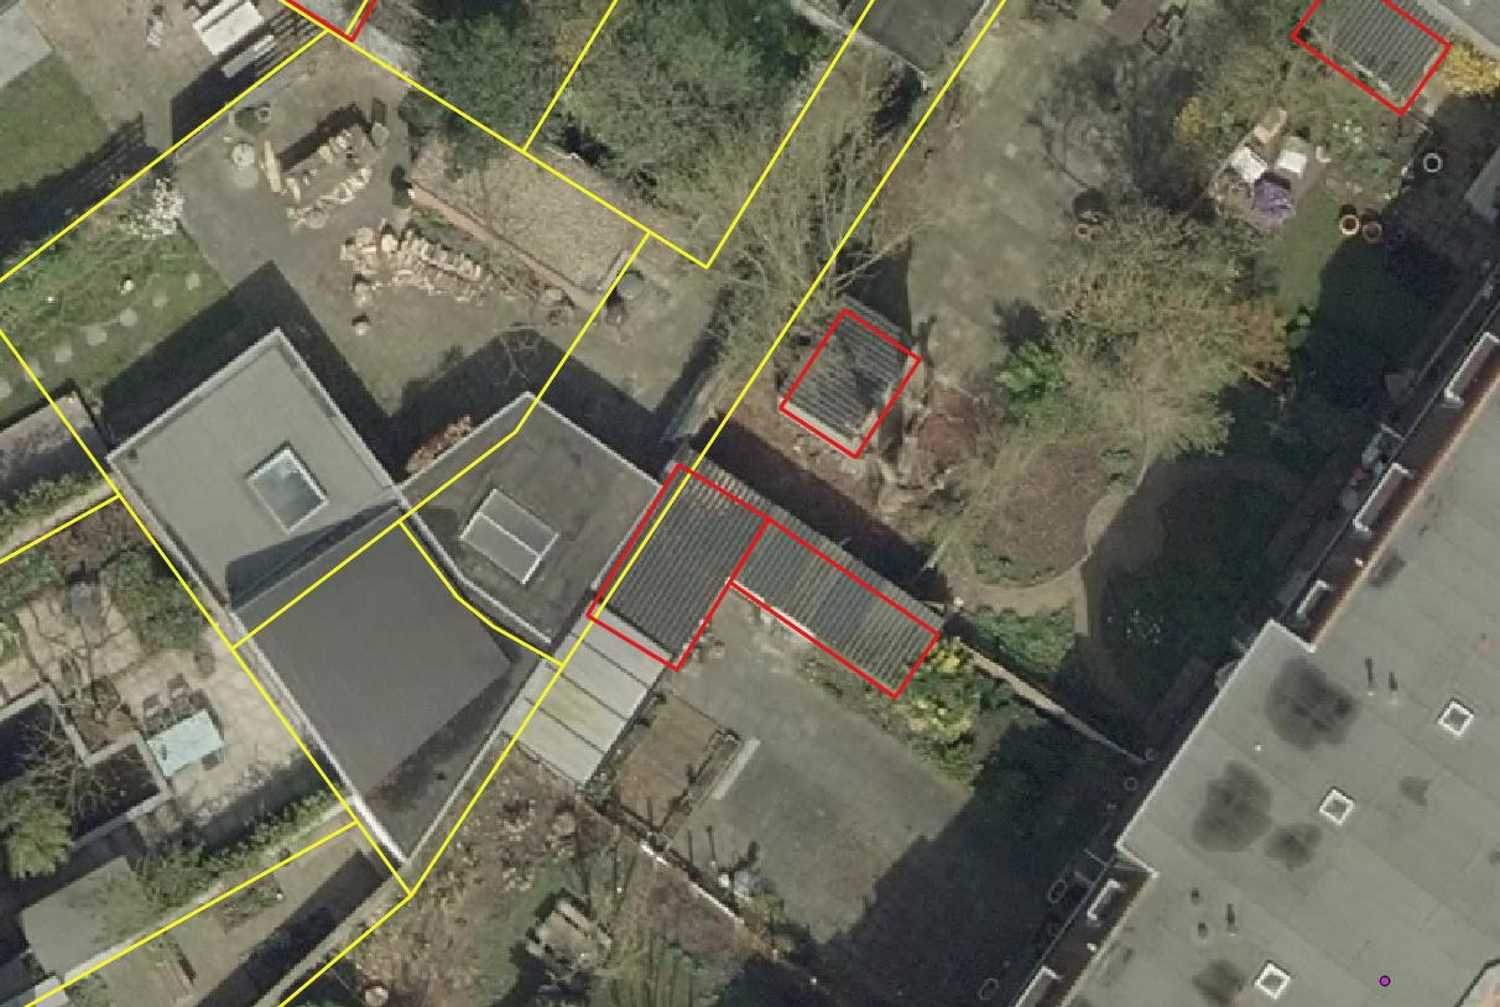 Satellite imagery is used to identify and monitor asbestos-containing roofs 